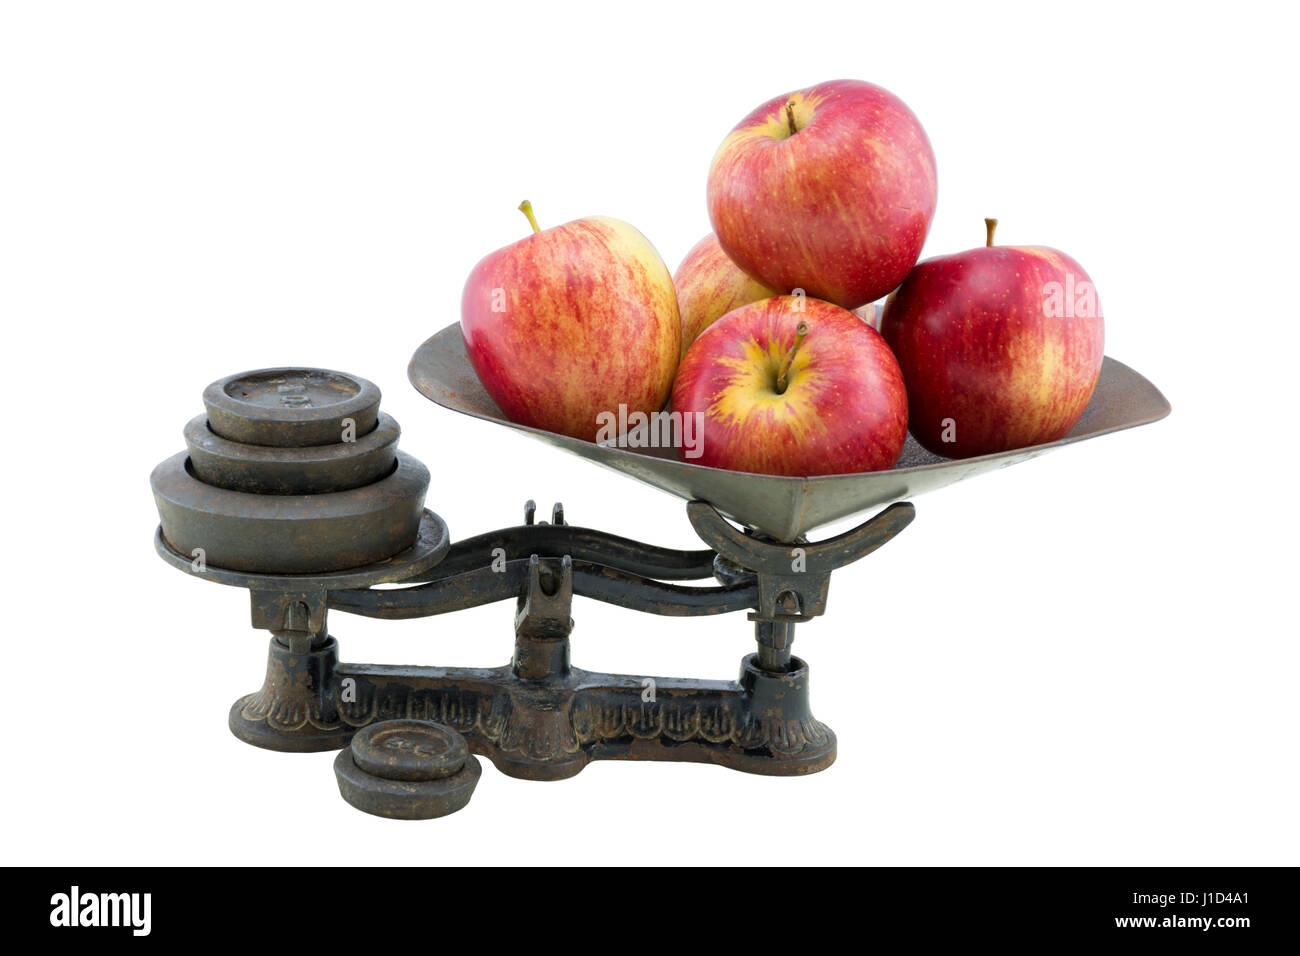 Weigh Apples On The Scales Healthy Food Market Stock Illustration